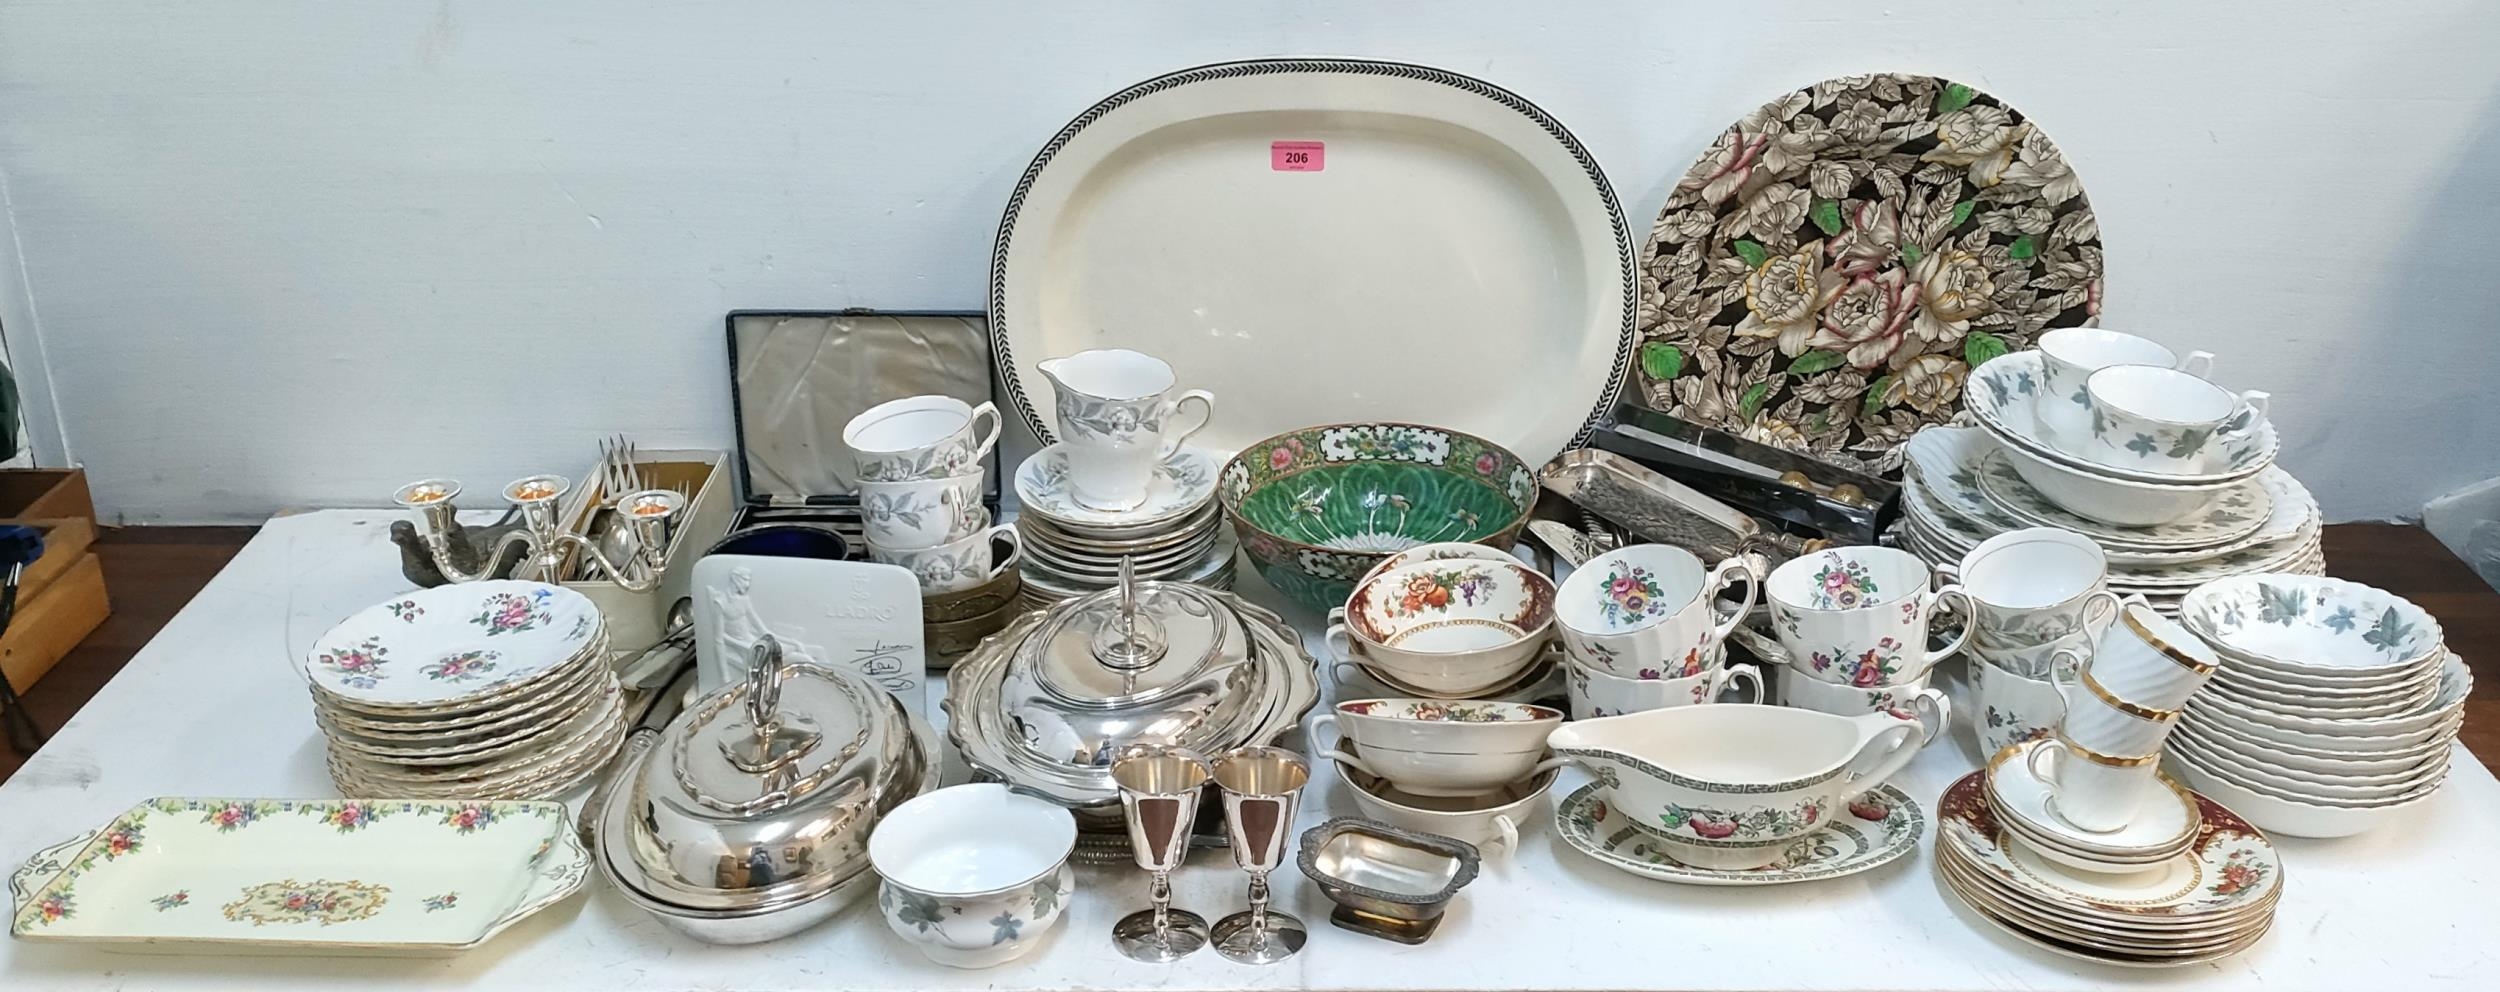 A mixed lot including silver plate, Gladstone Picardy pattern china, Wedgwood Etruria and Johnson